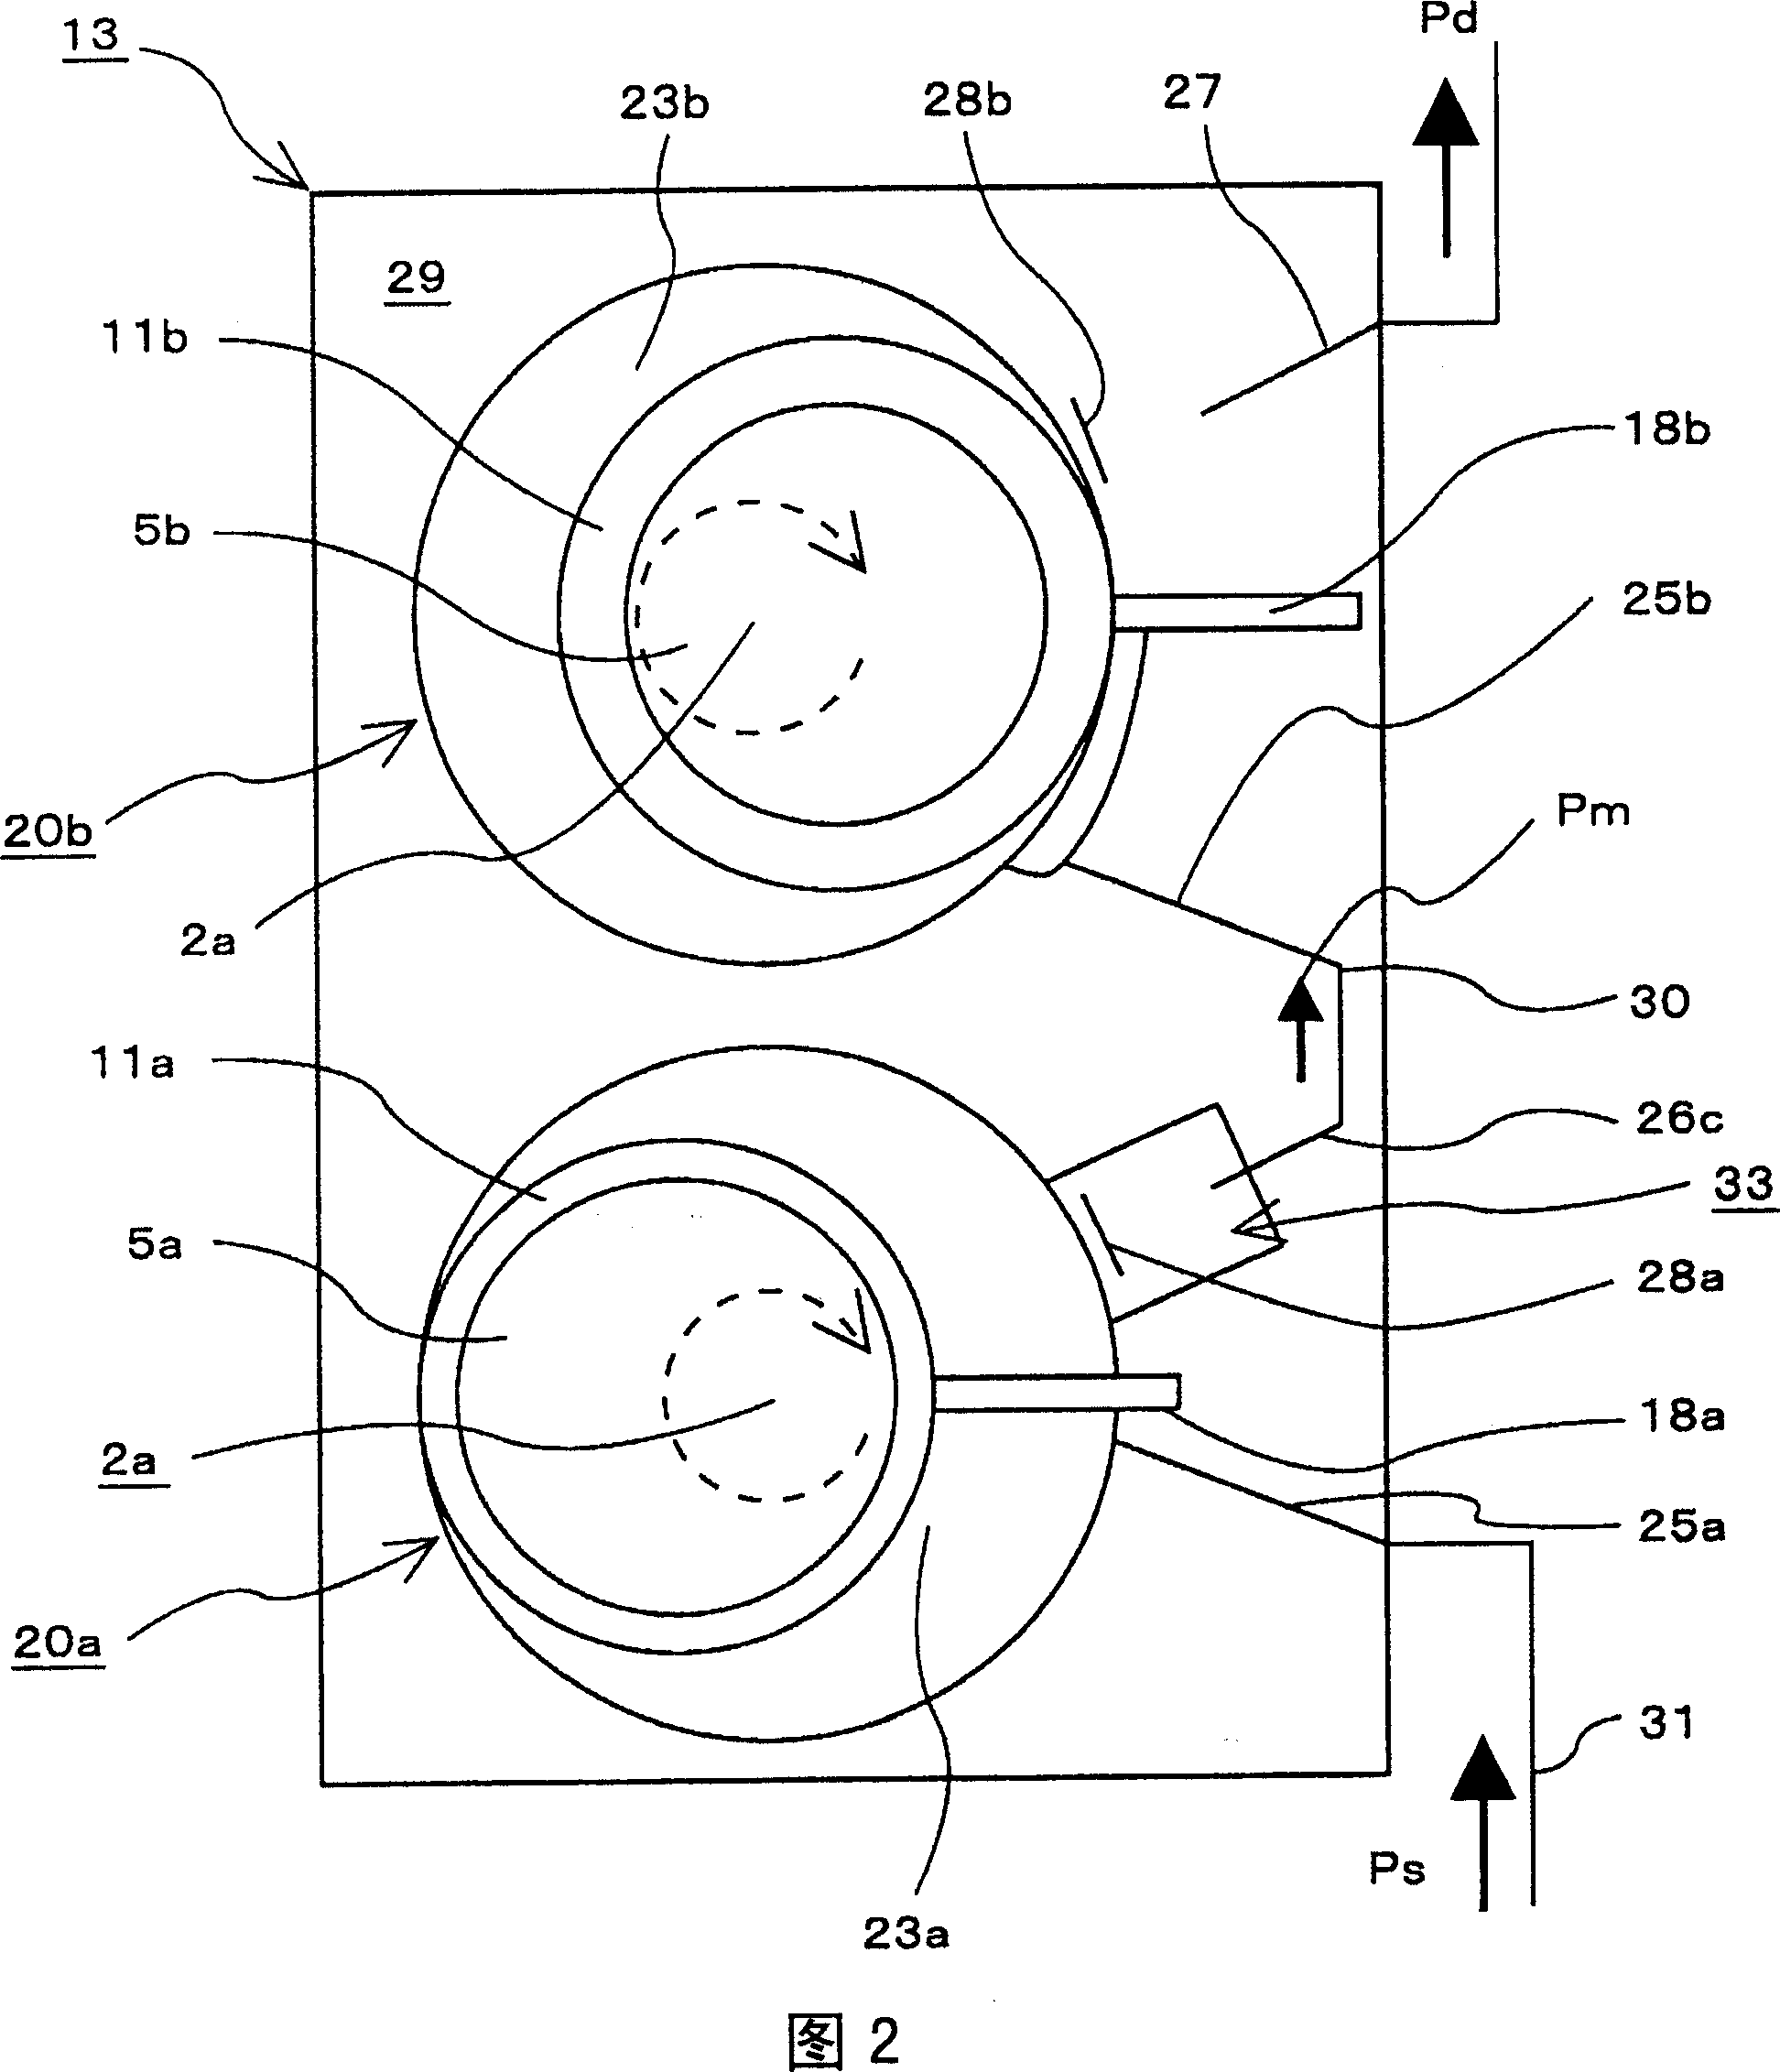 Hermetic two-stage rotary compressor